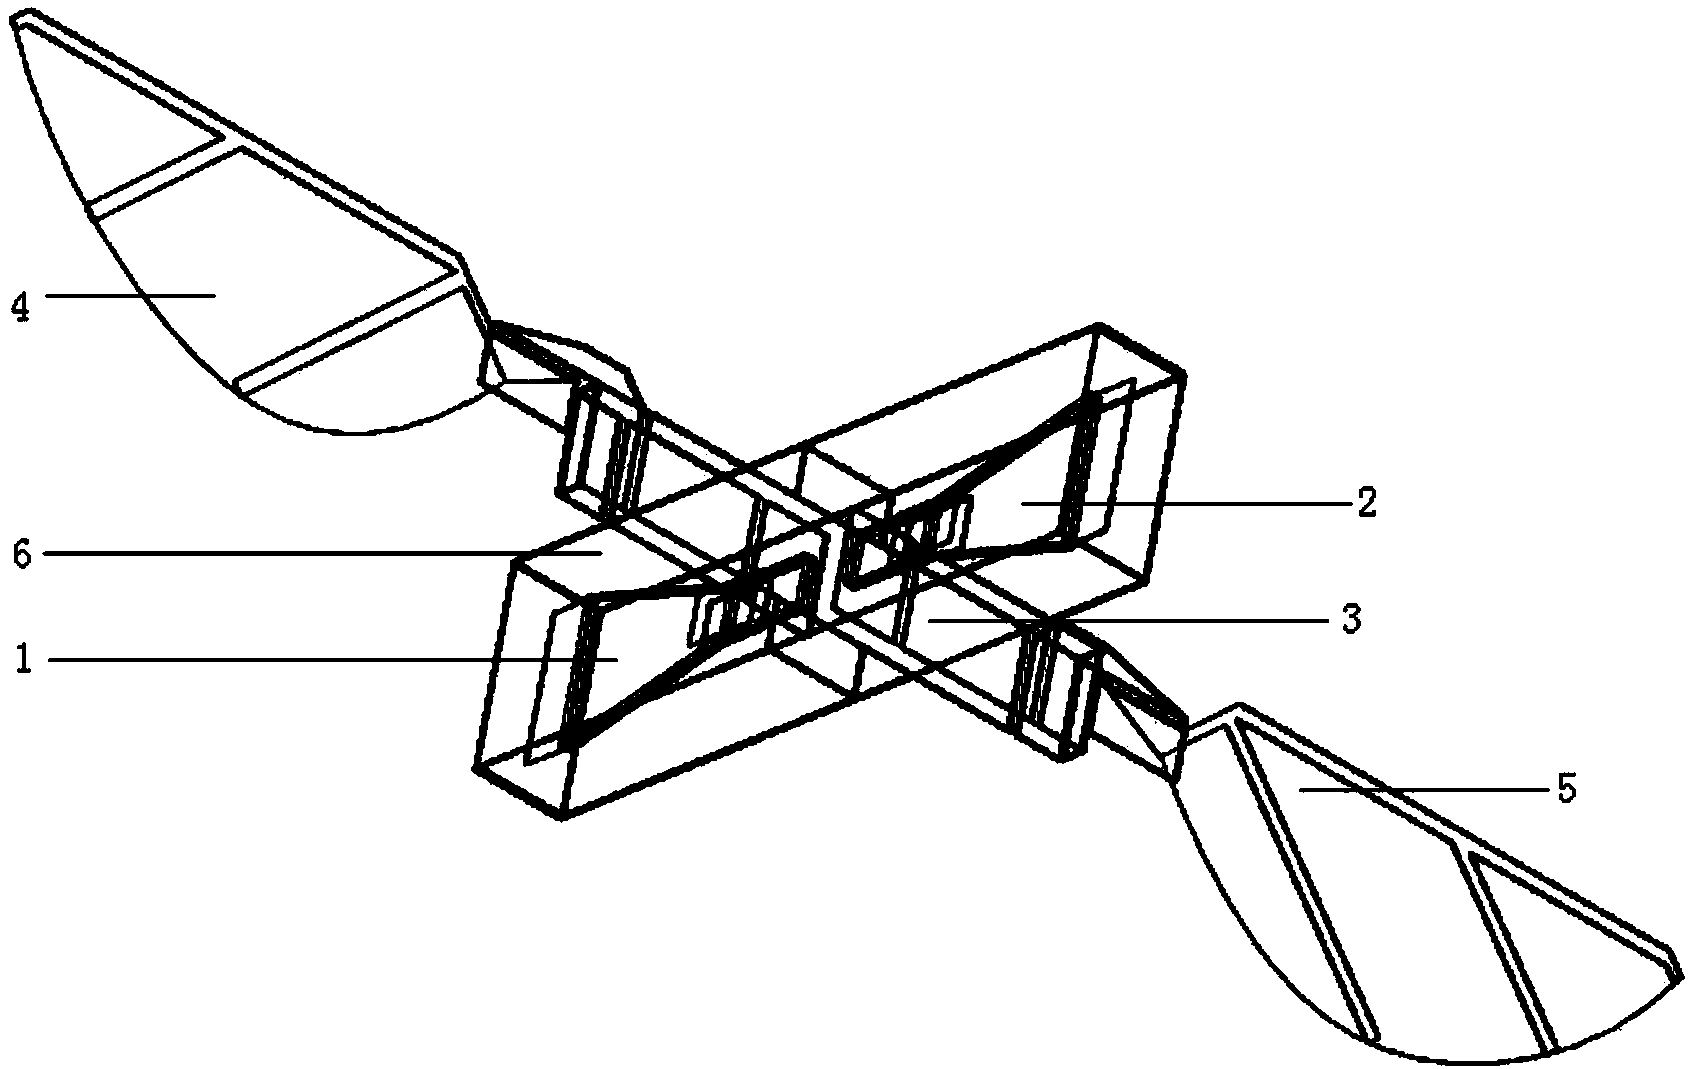 Double piezoelectric actuators type micro flapping wing aircraft based on soft hinges